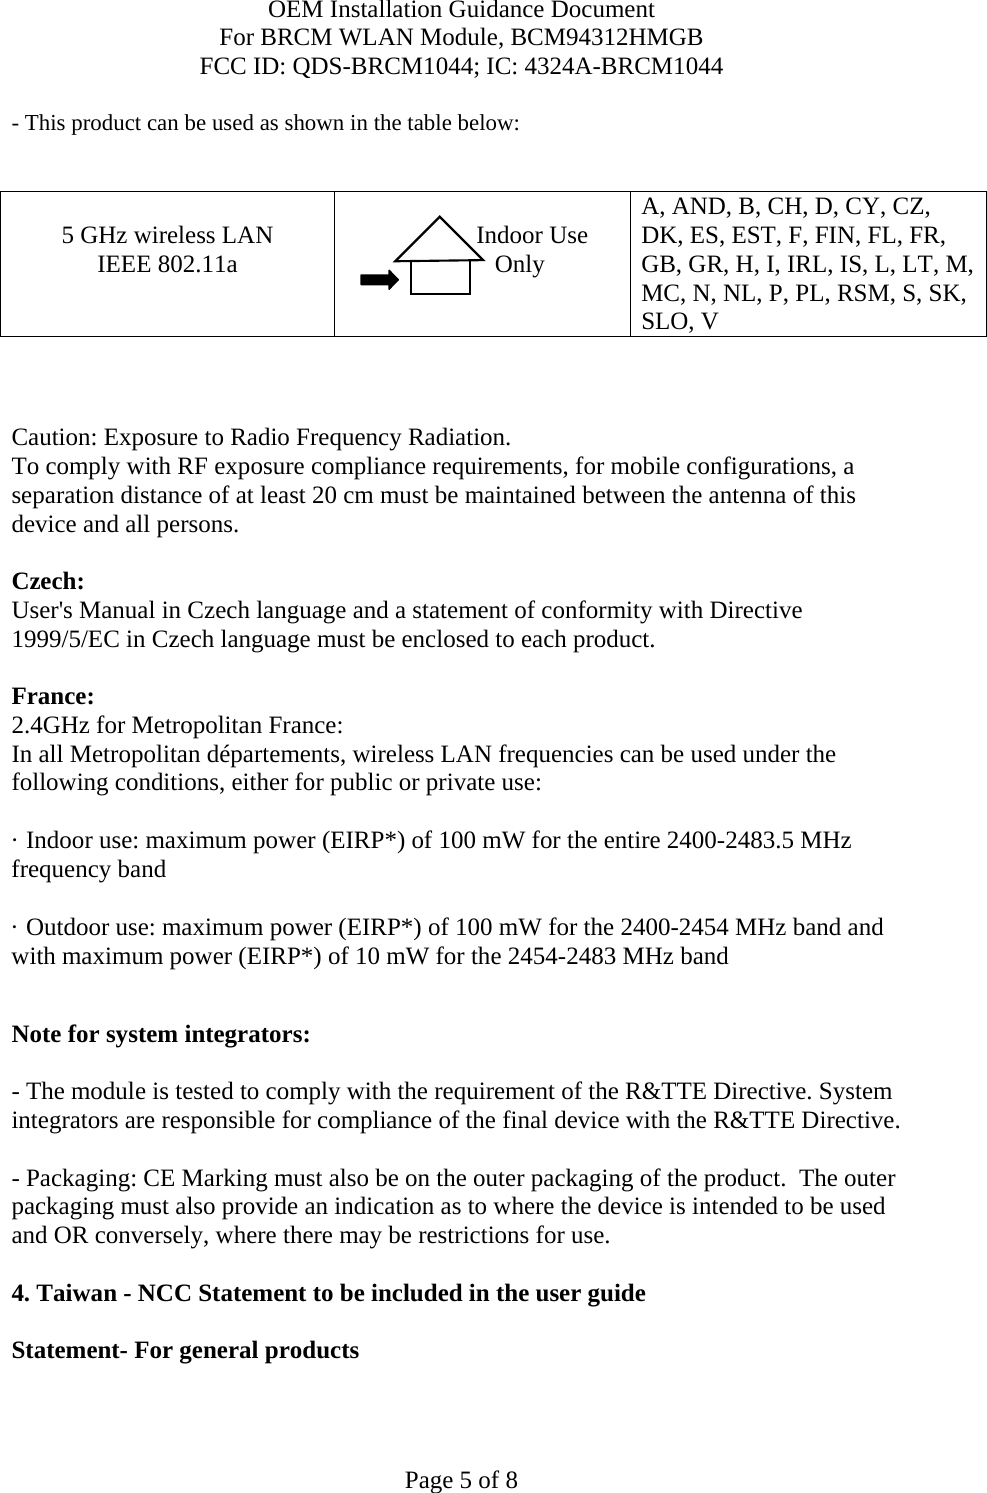 OEM Installation Guidance Document For BRCM WLAN Module, BCM94312HMGB FCC ID: QDS-BRCM1044; IC: 4324A-BRCM1044  Page 5 of 8 - This product can be used as shown in the table below:   5 GHz wireless LAN IEEE 802.11a                  Indoor Use             Only  A, AND, B, CH, D, CY, CZ, DK, ES, EST, F, FIN, FL, FR, GB, GR, H, I, IRL, IS, L, LT, M, MC, N, NL, P, PL, RSM, S, SK, SLO, V    Caution: Exposure to Radio Frequency Radiation.   To comply with RF exposure compliance requirements, for mobile configurations, a separation distance of at least 20 cm must be maintained between the antenna of this device and all persons.  Czech:  User&apos;s Manual in Czech language and a statement of conformity with Directive 1999/5/EC in Czech language must be enclosed to each product.   France: 2.4GHz for Metropolitan France:   In all Metropolitan départements, wireless LAN frequencies can be used under the following conditions, either for public or private use:  · Indoor use: maximum power (EIRP*) of 100 mW for the entire 2400-2483.5 MHz frequency band · Outdoor use: maximum power (EIRP*) of 100 mW for the 2400-2454 MHz band and with maximum power (EIRP*) of 10 mW for the 2454-2483 MHz band  Note for system integrators:   - The module is tested to comply with the requirement of the R&amp;TTE Directive. System integrators are responsible for compliance of the final device with the R&amp;TTE Directive.   - Packaging: CE Marking must also be on the outer packaging of the product.  The outer packaging must also provide an indication as to where the device is intended to be used and OR conversely, where there may be restrictions for use.   4. Taiwan - NCC Statement to be included in the user guide  Statement- For general products  